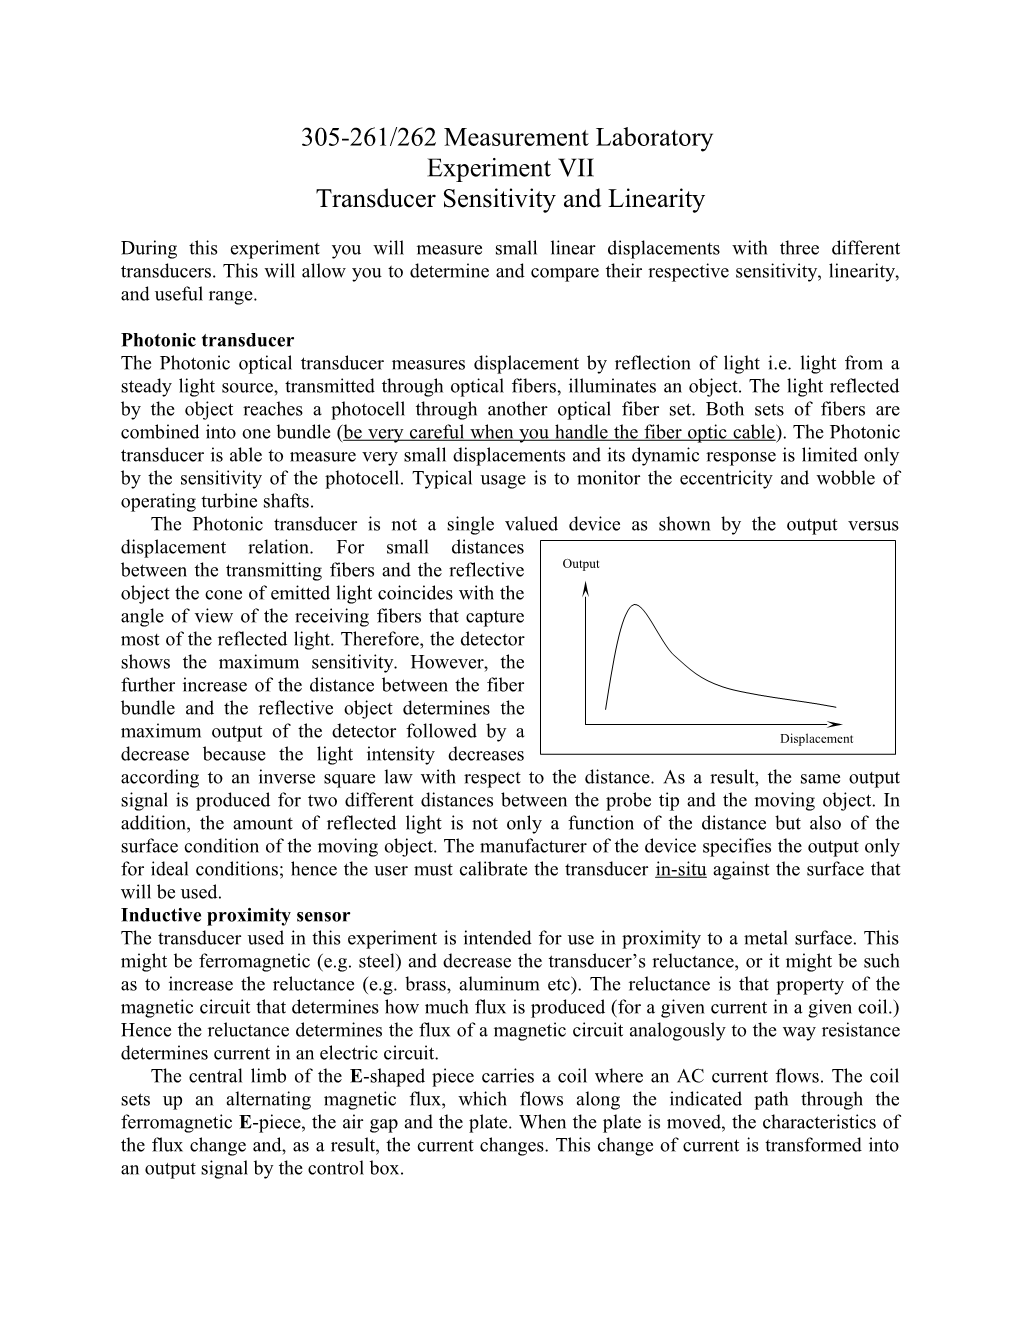 Transducer Sensitivity and Linearity